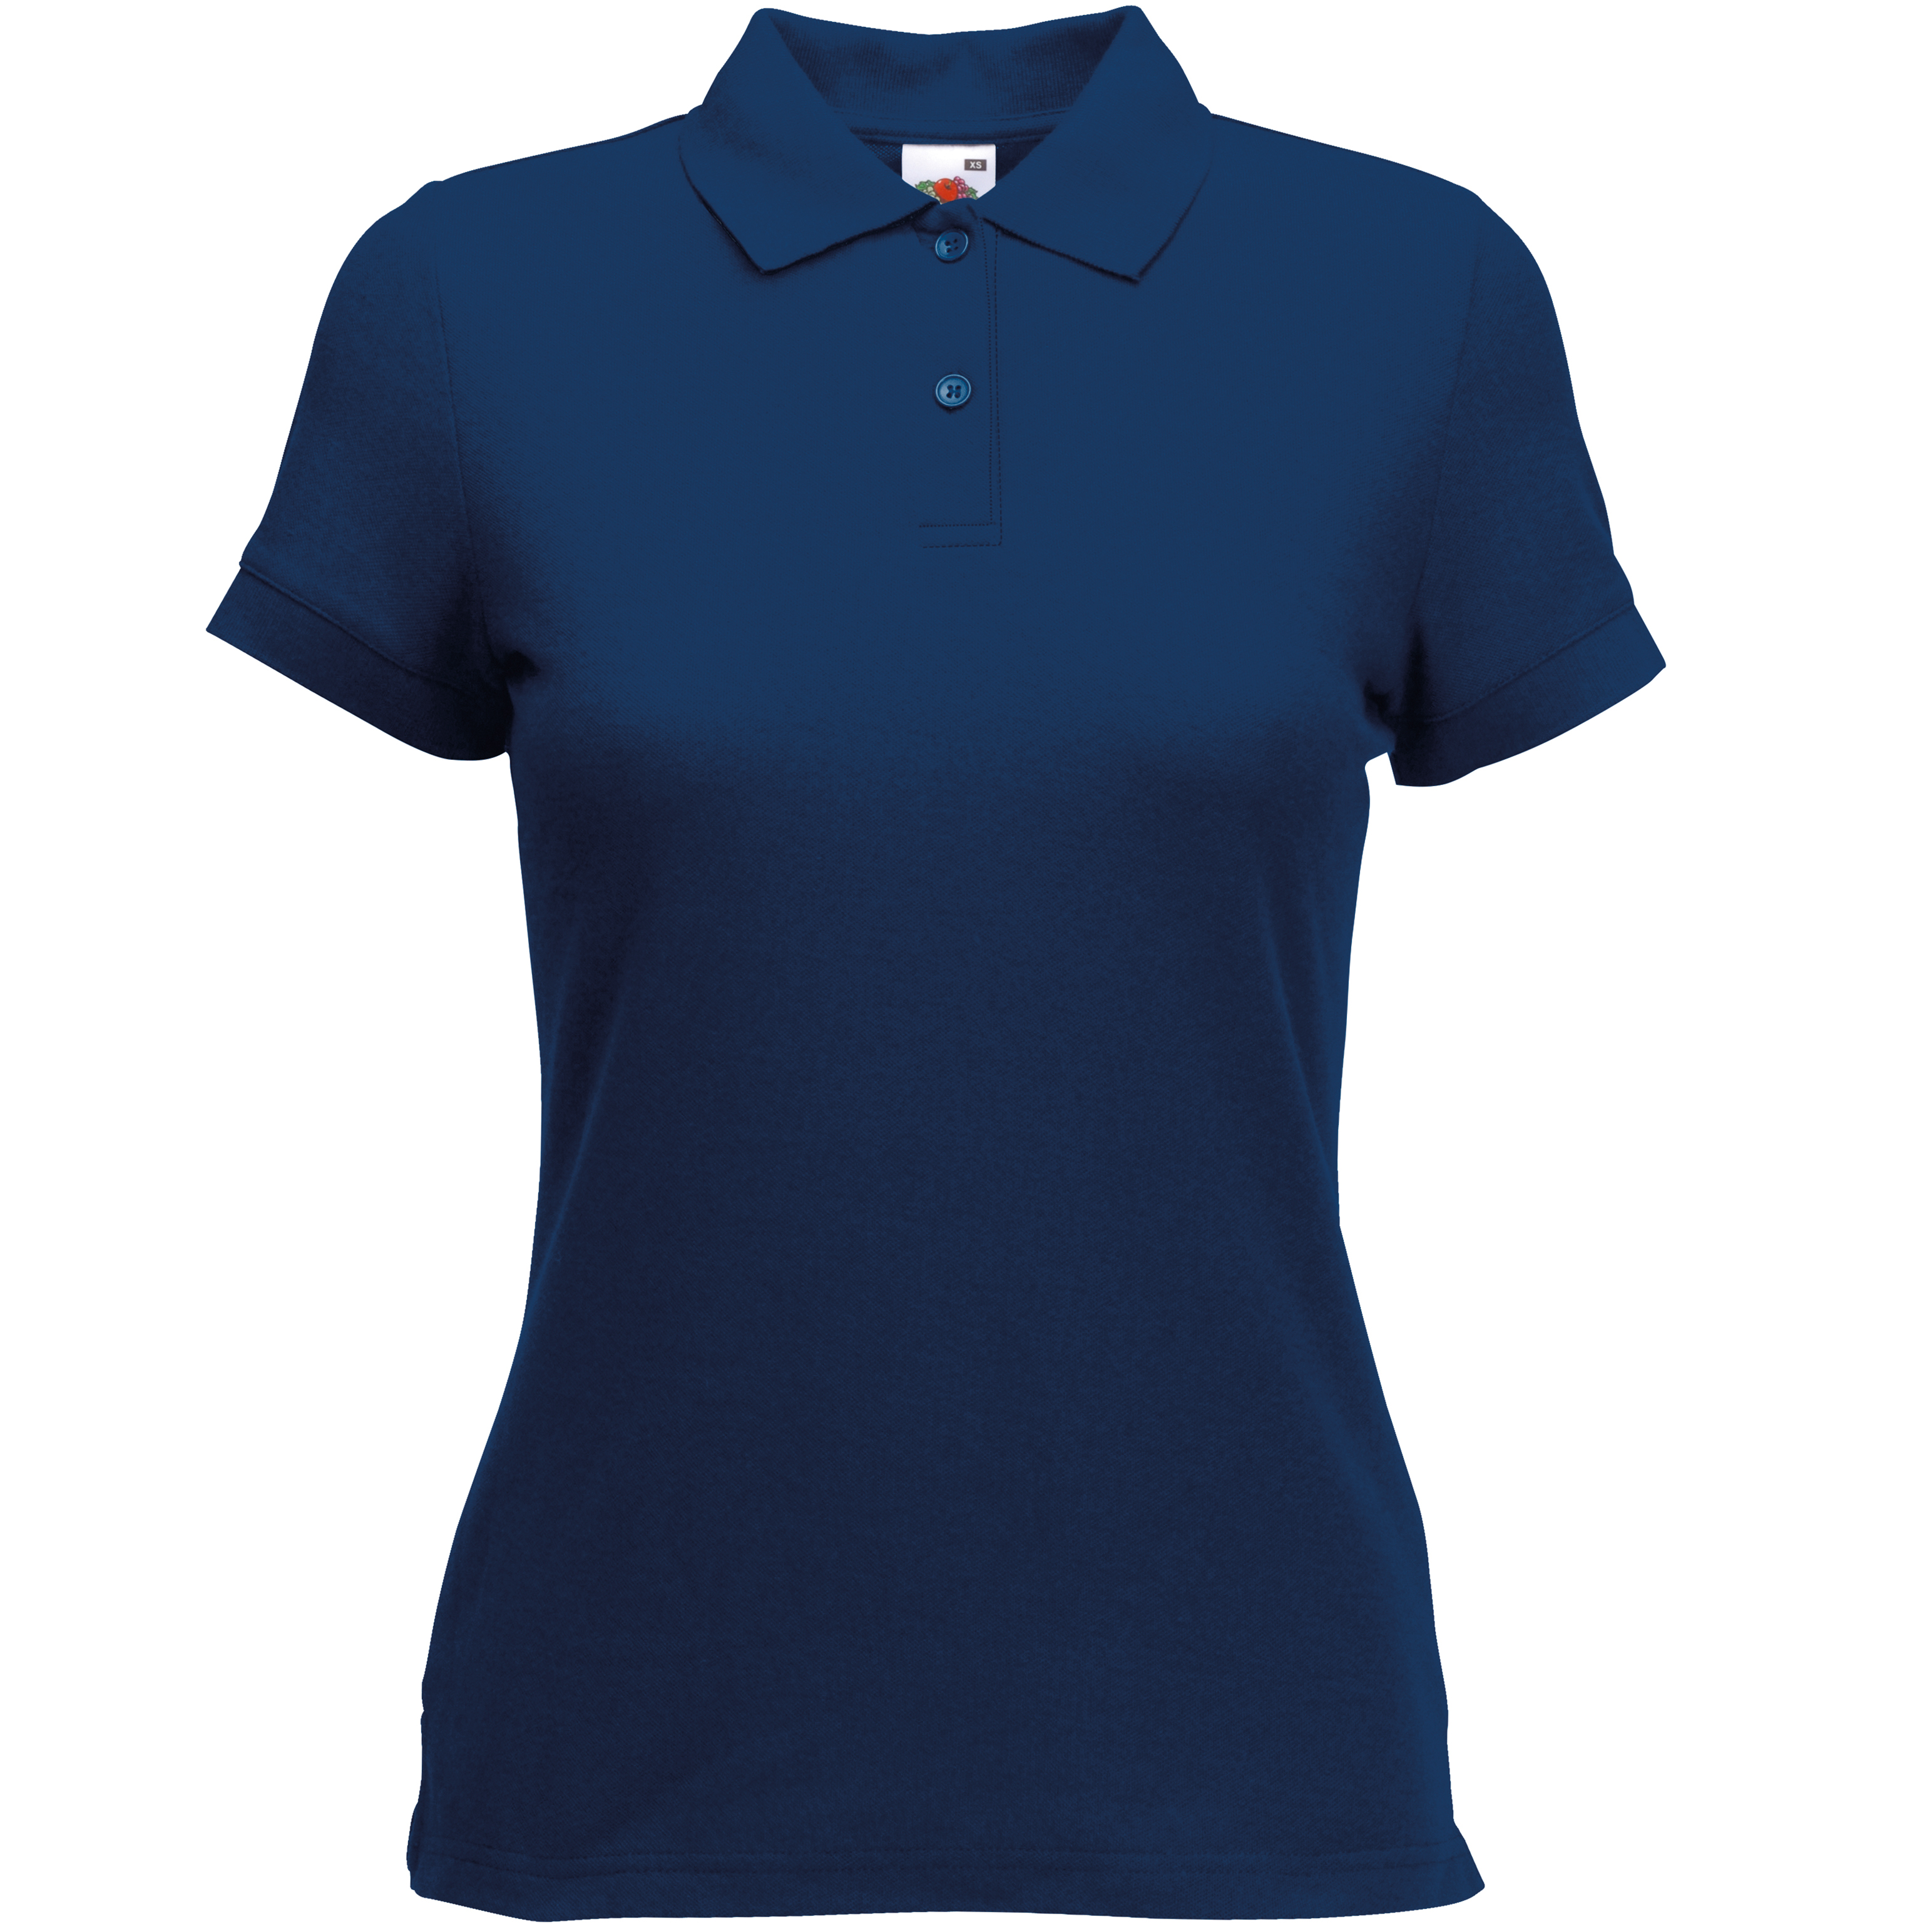 ax-httpswebsystems.s3.amazonaws.comtmp_for_downloadfruit-of-the-loom-ladies-65-35-polo-navy.jpg